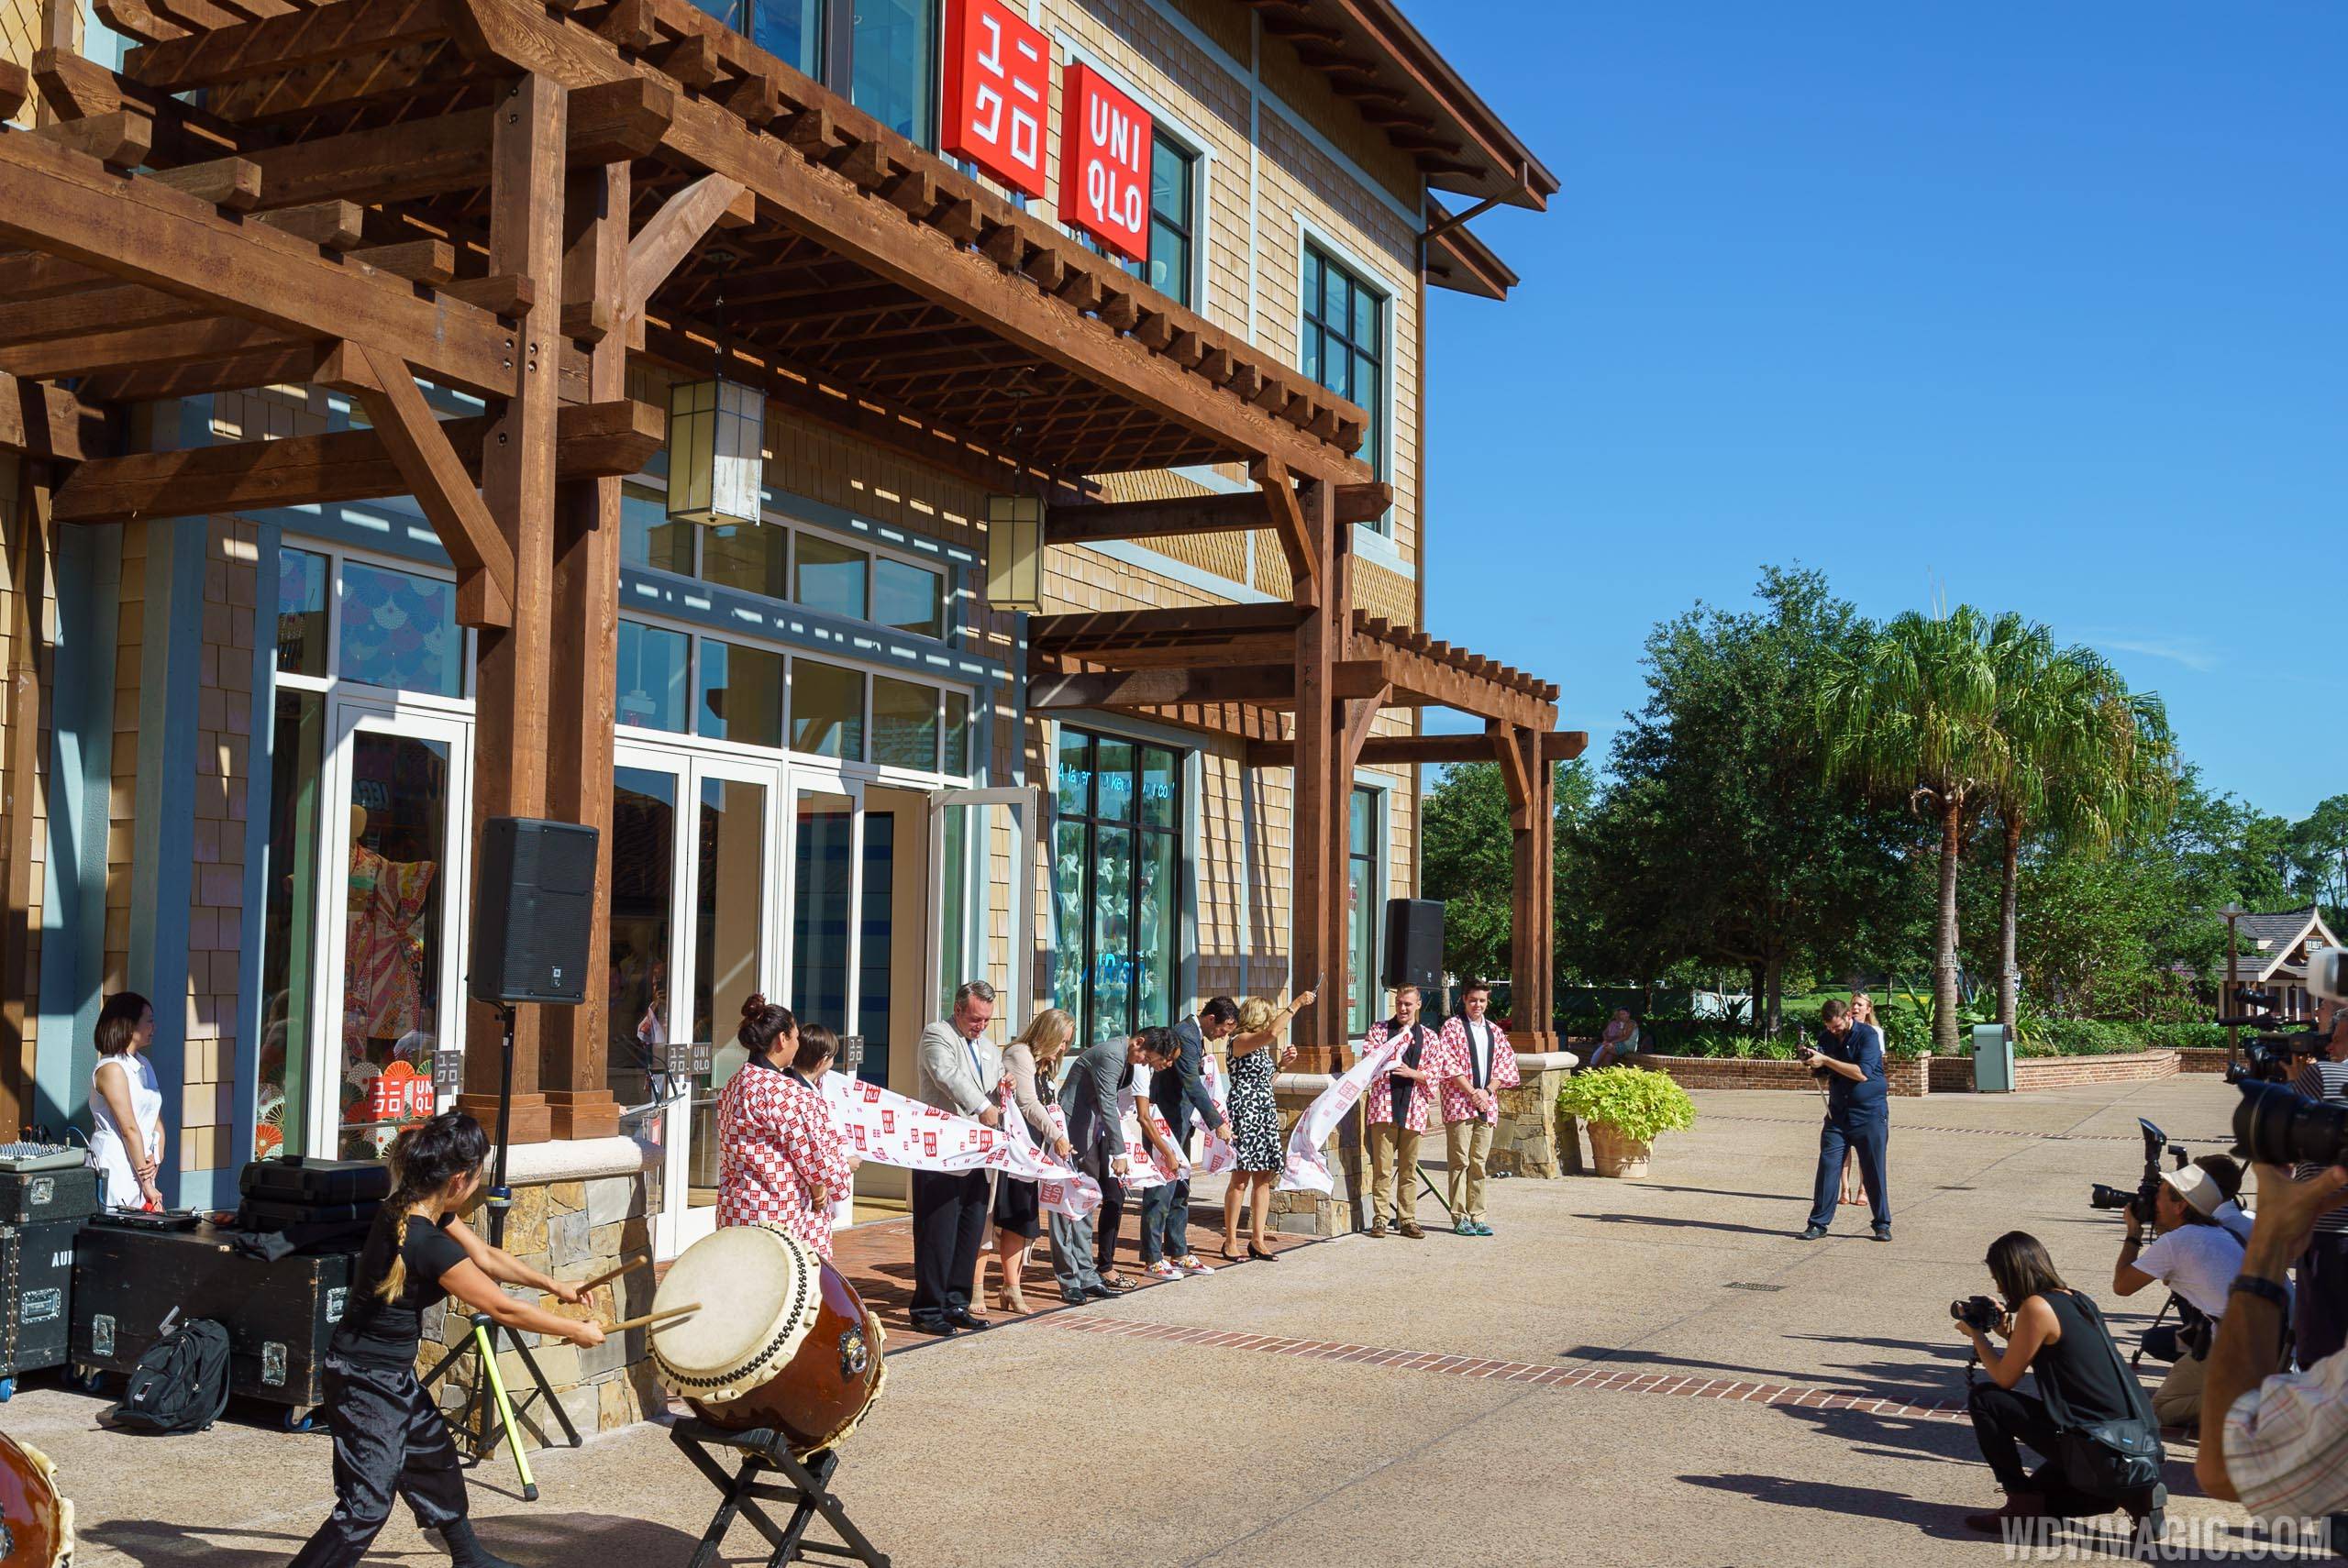 PHOTOS - UNIQLO opens first Florida store at Disney Springs